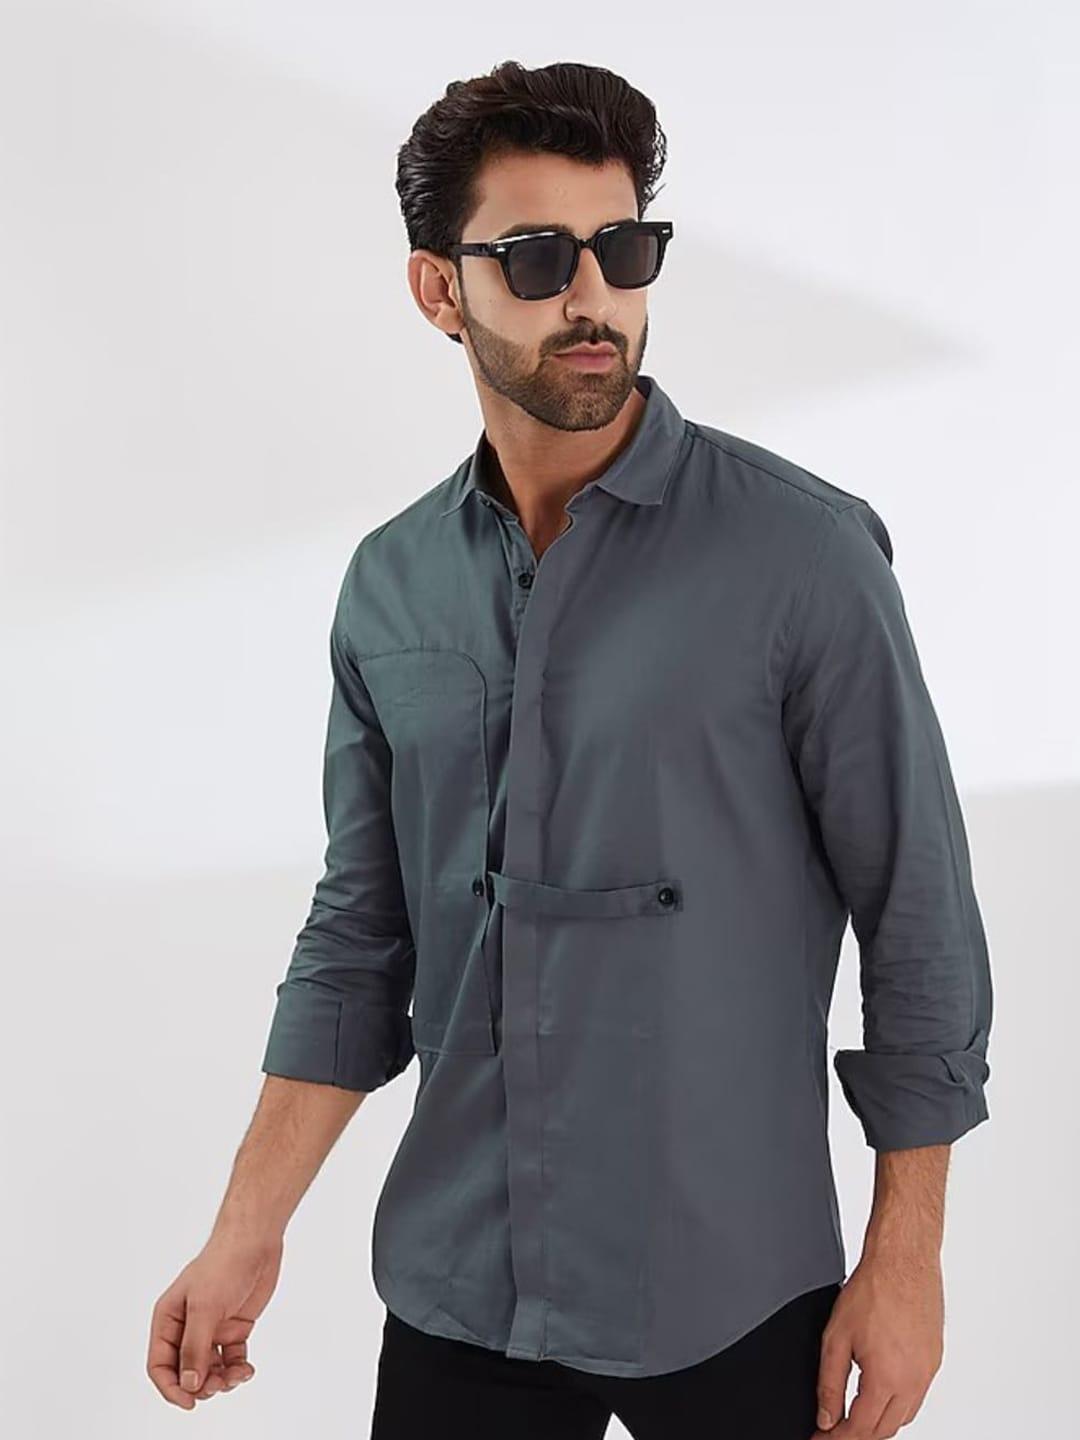 he-spoke-smart-tailored-fit-spread-collar-pure-cotton-casual-shirt